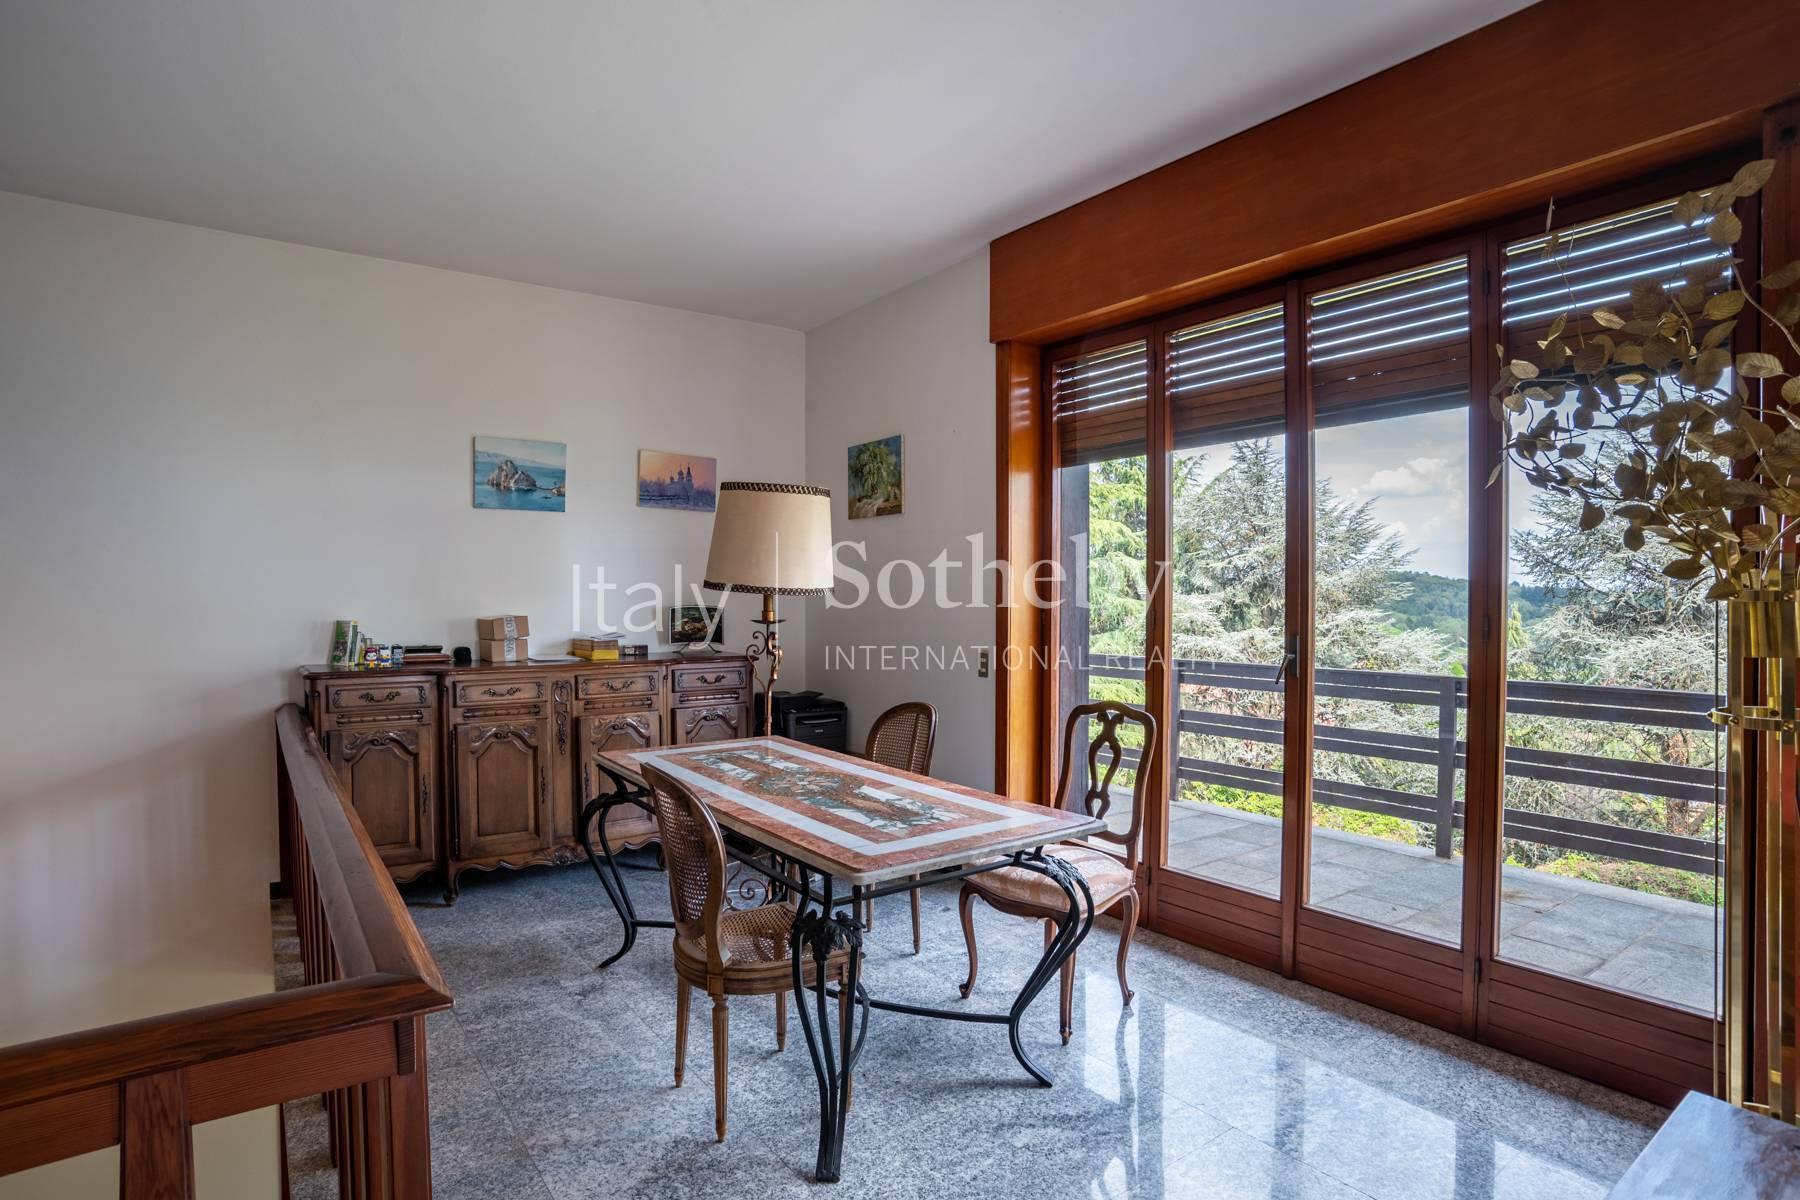 Charming villa immersed in a huge park of olive trees and flowers. - 8